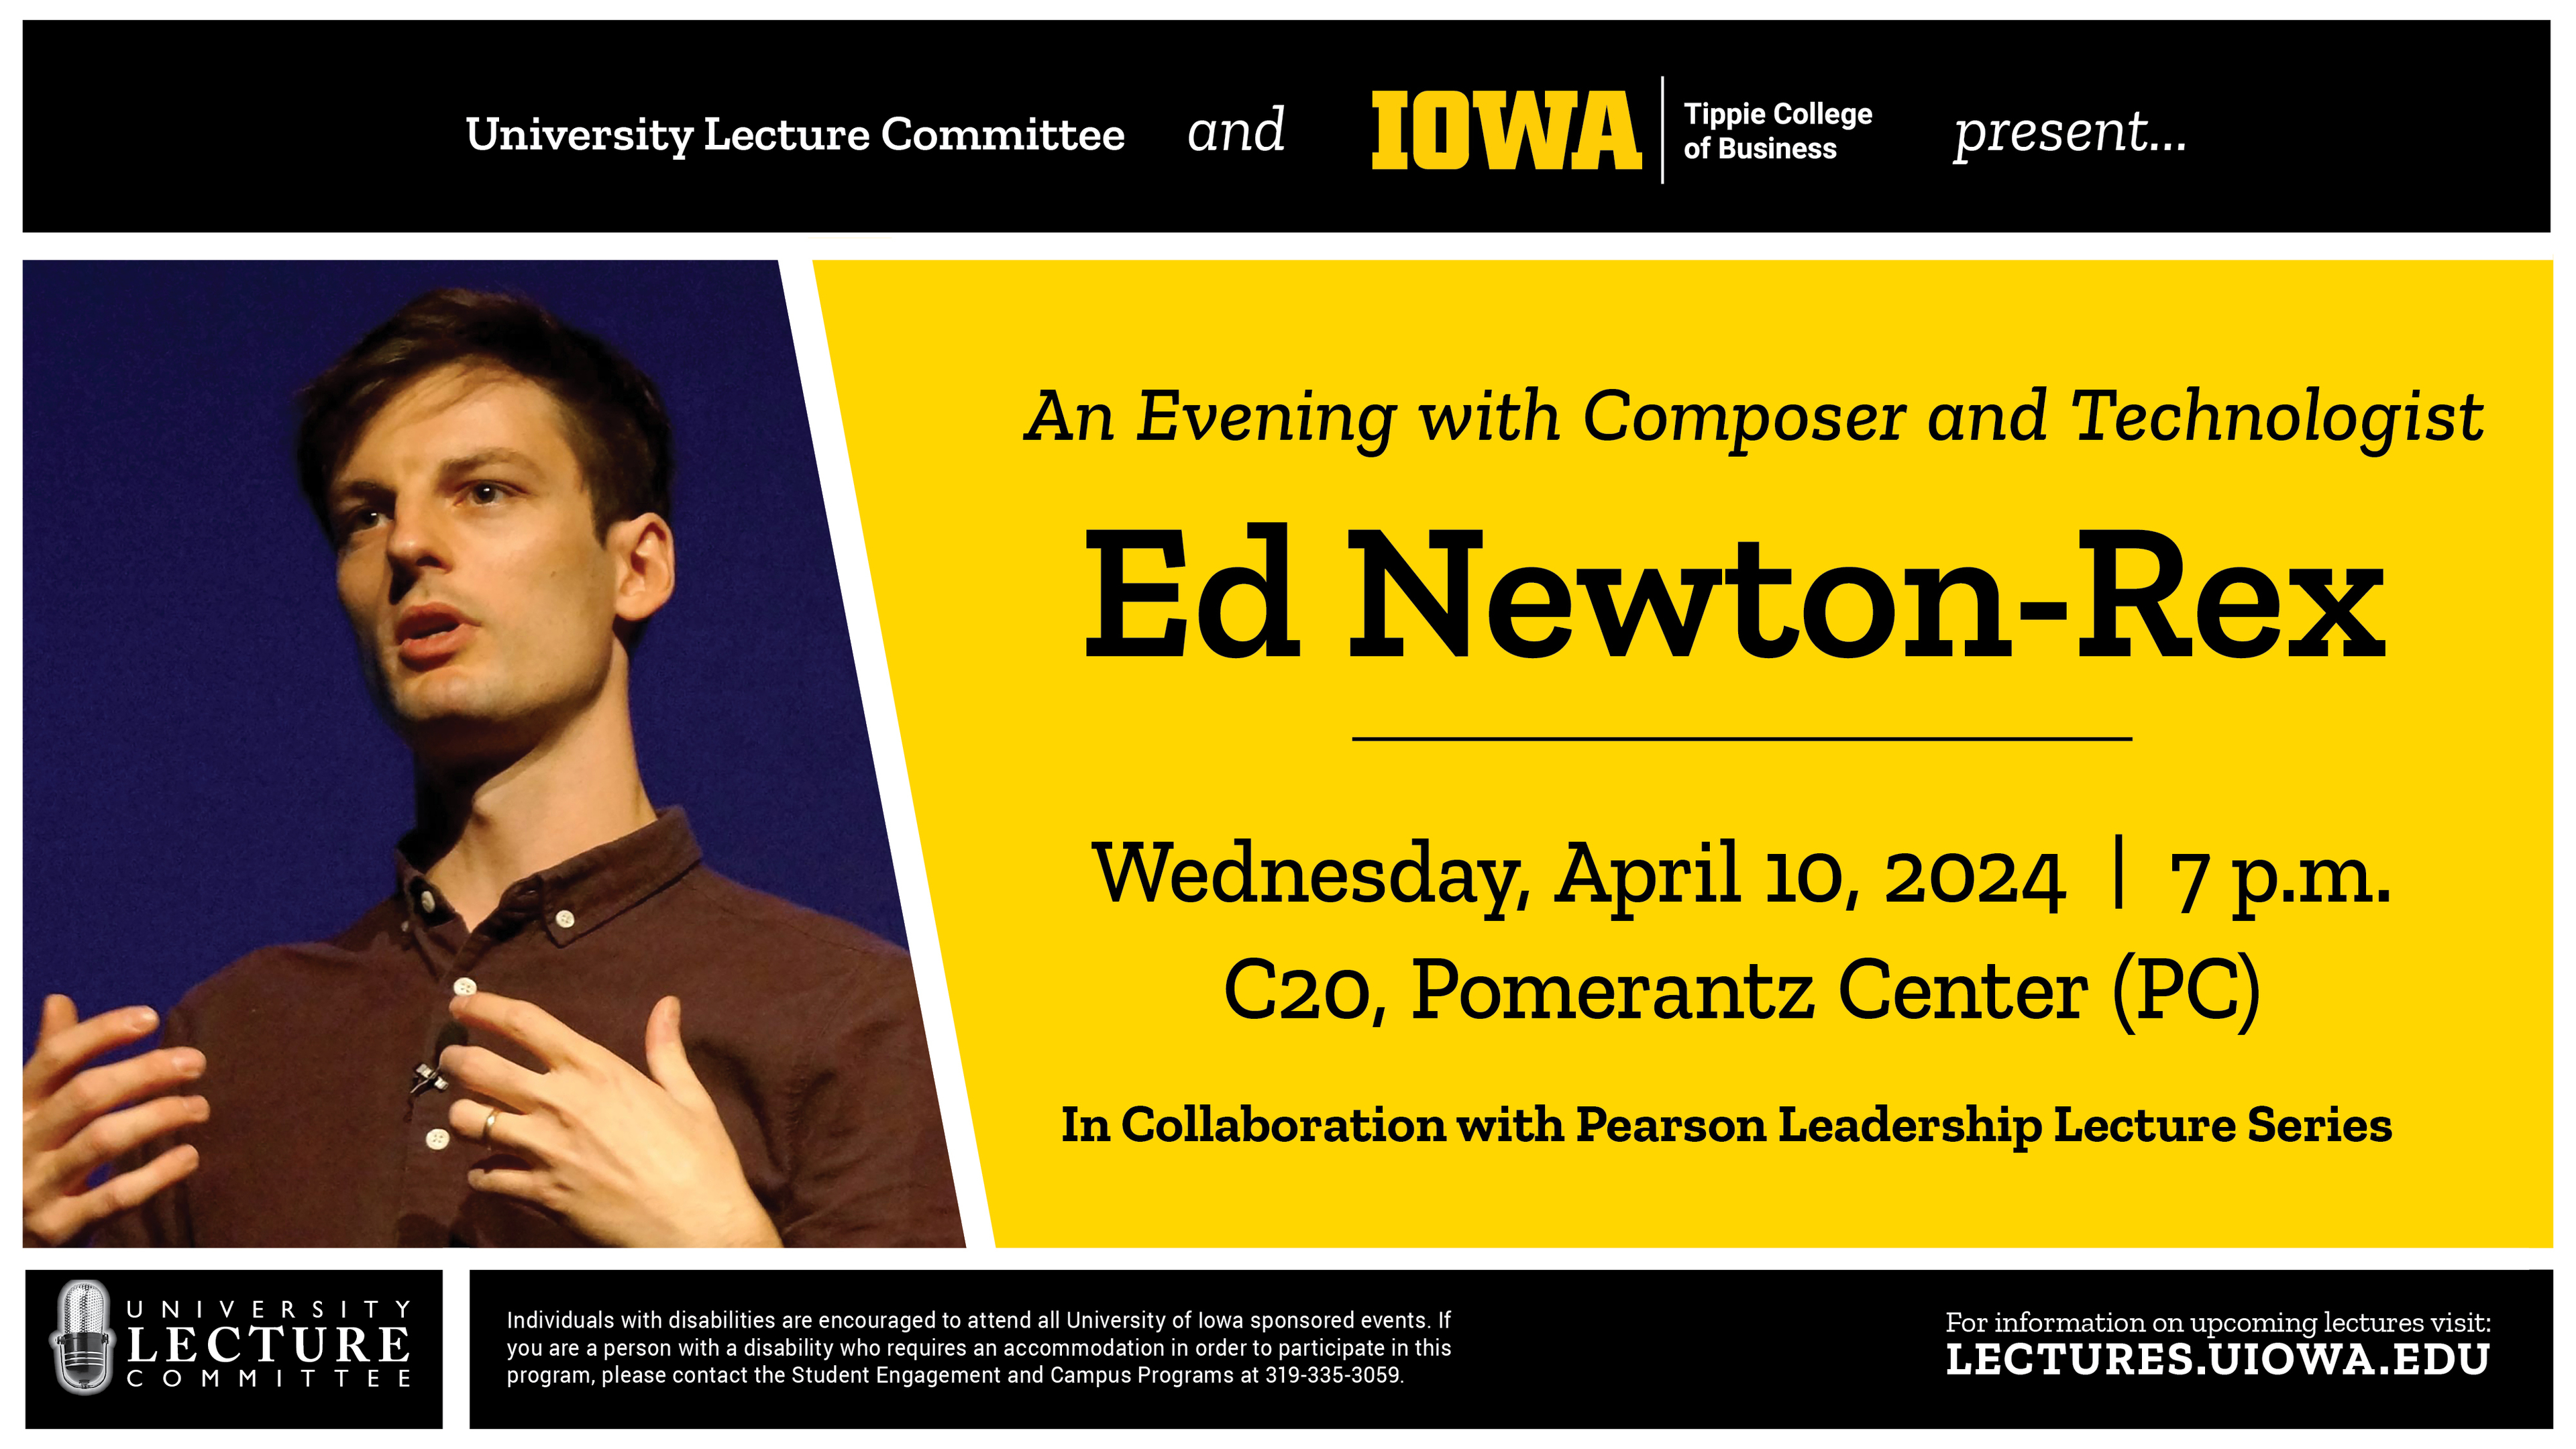 An Evening with Composer and Technologist Ed Newton-Rex: Wednesday, April 10 at 7 p.m. in C20, Pomerantz Center